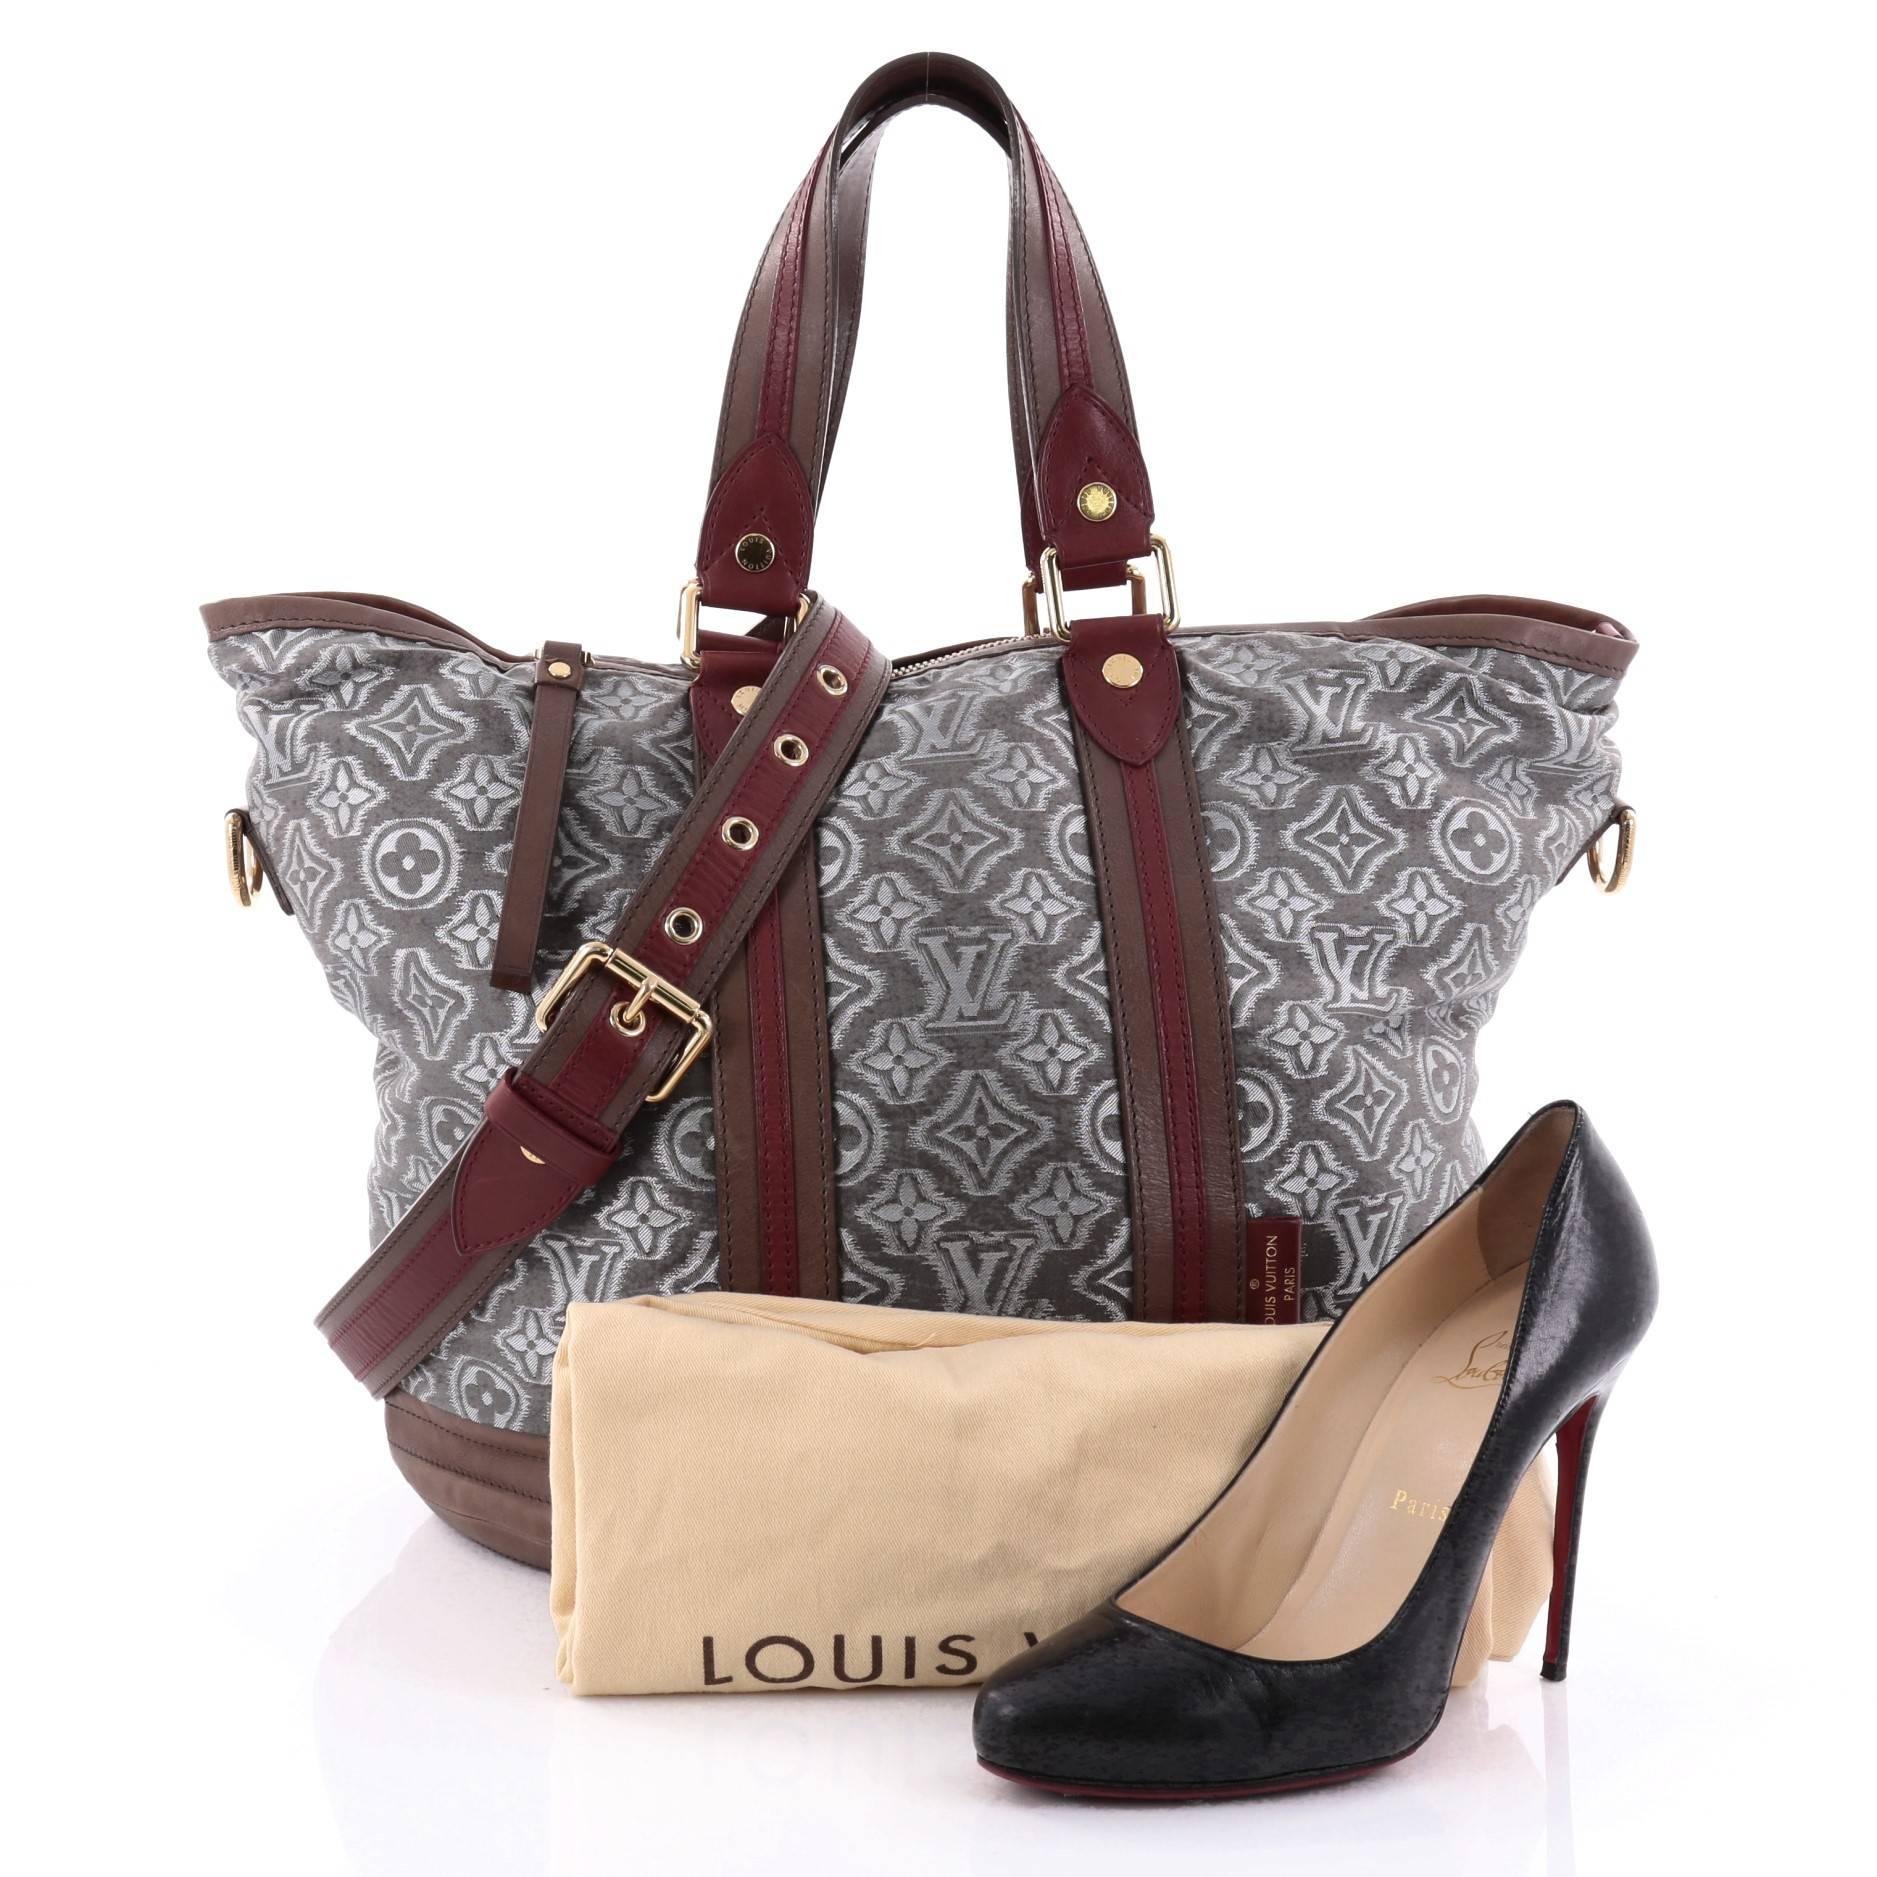 This authentic Louis Vuitton Limited Edition Aviator Handbag Monogram Jacquard from the brand's Pre-Fall 2010 Collection is a collector's piece made for LV lovers. Crafted from gray monogram jacquard with brown and red leather panels and trims, this